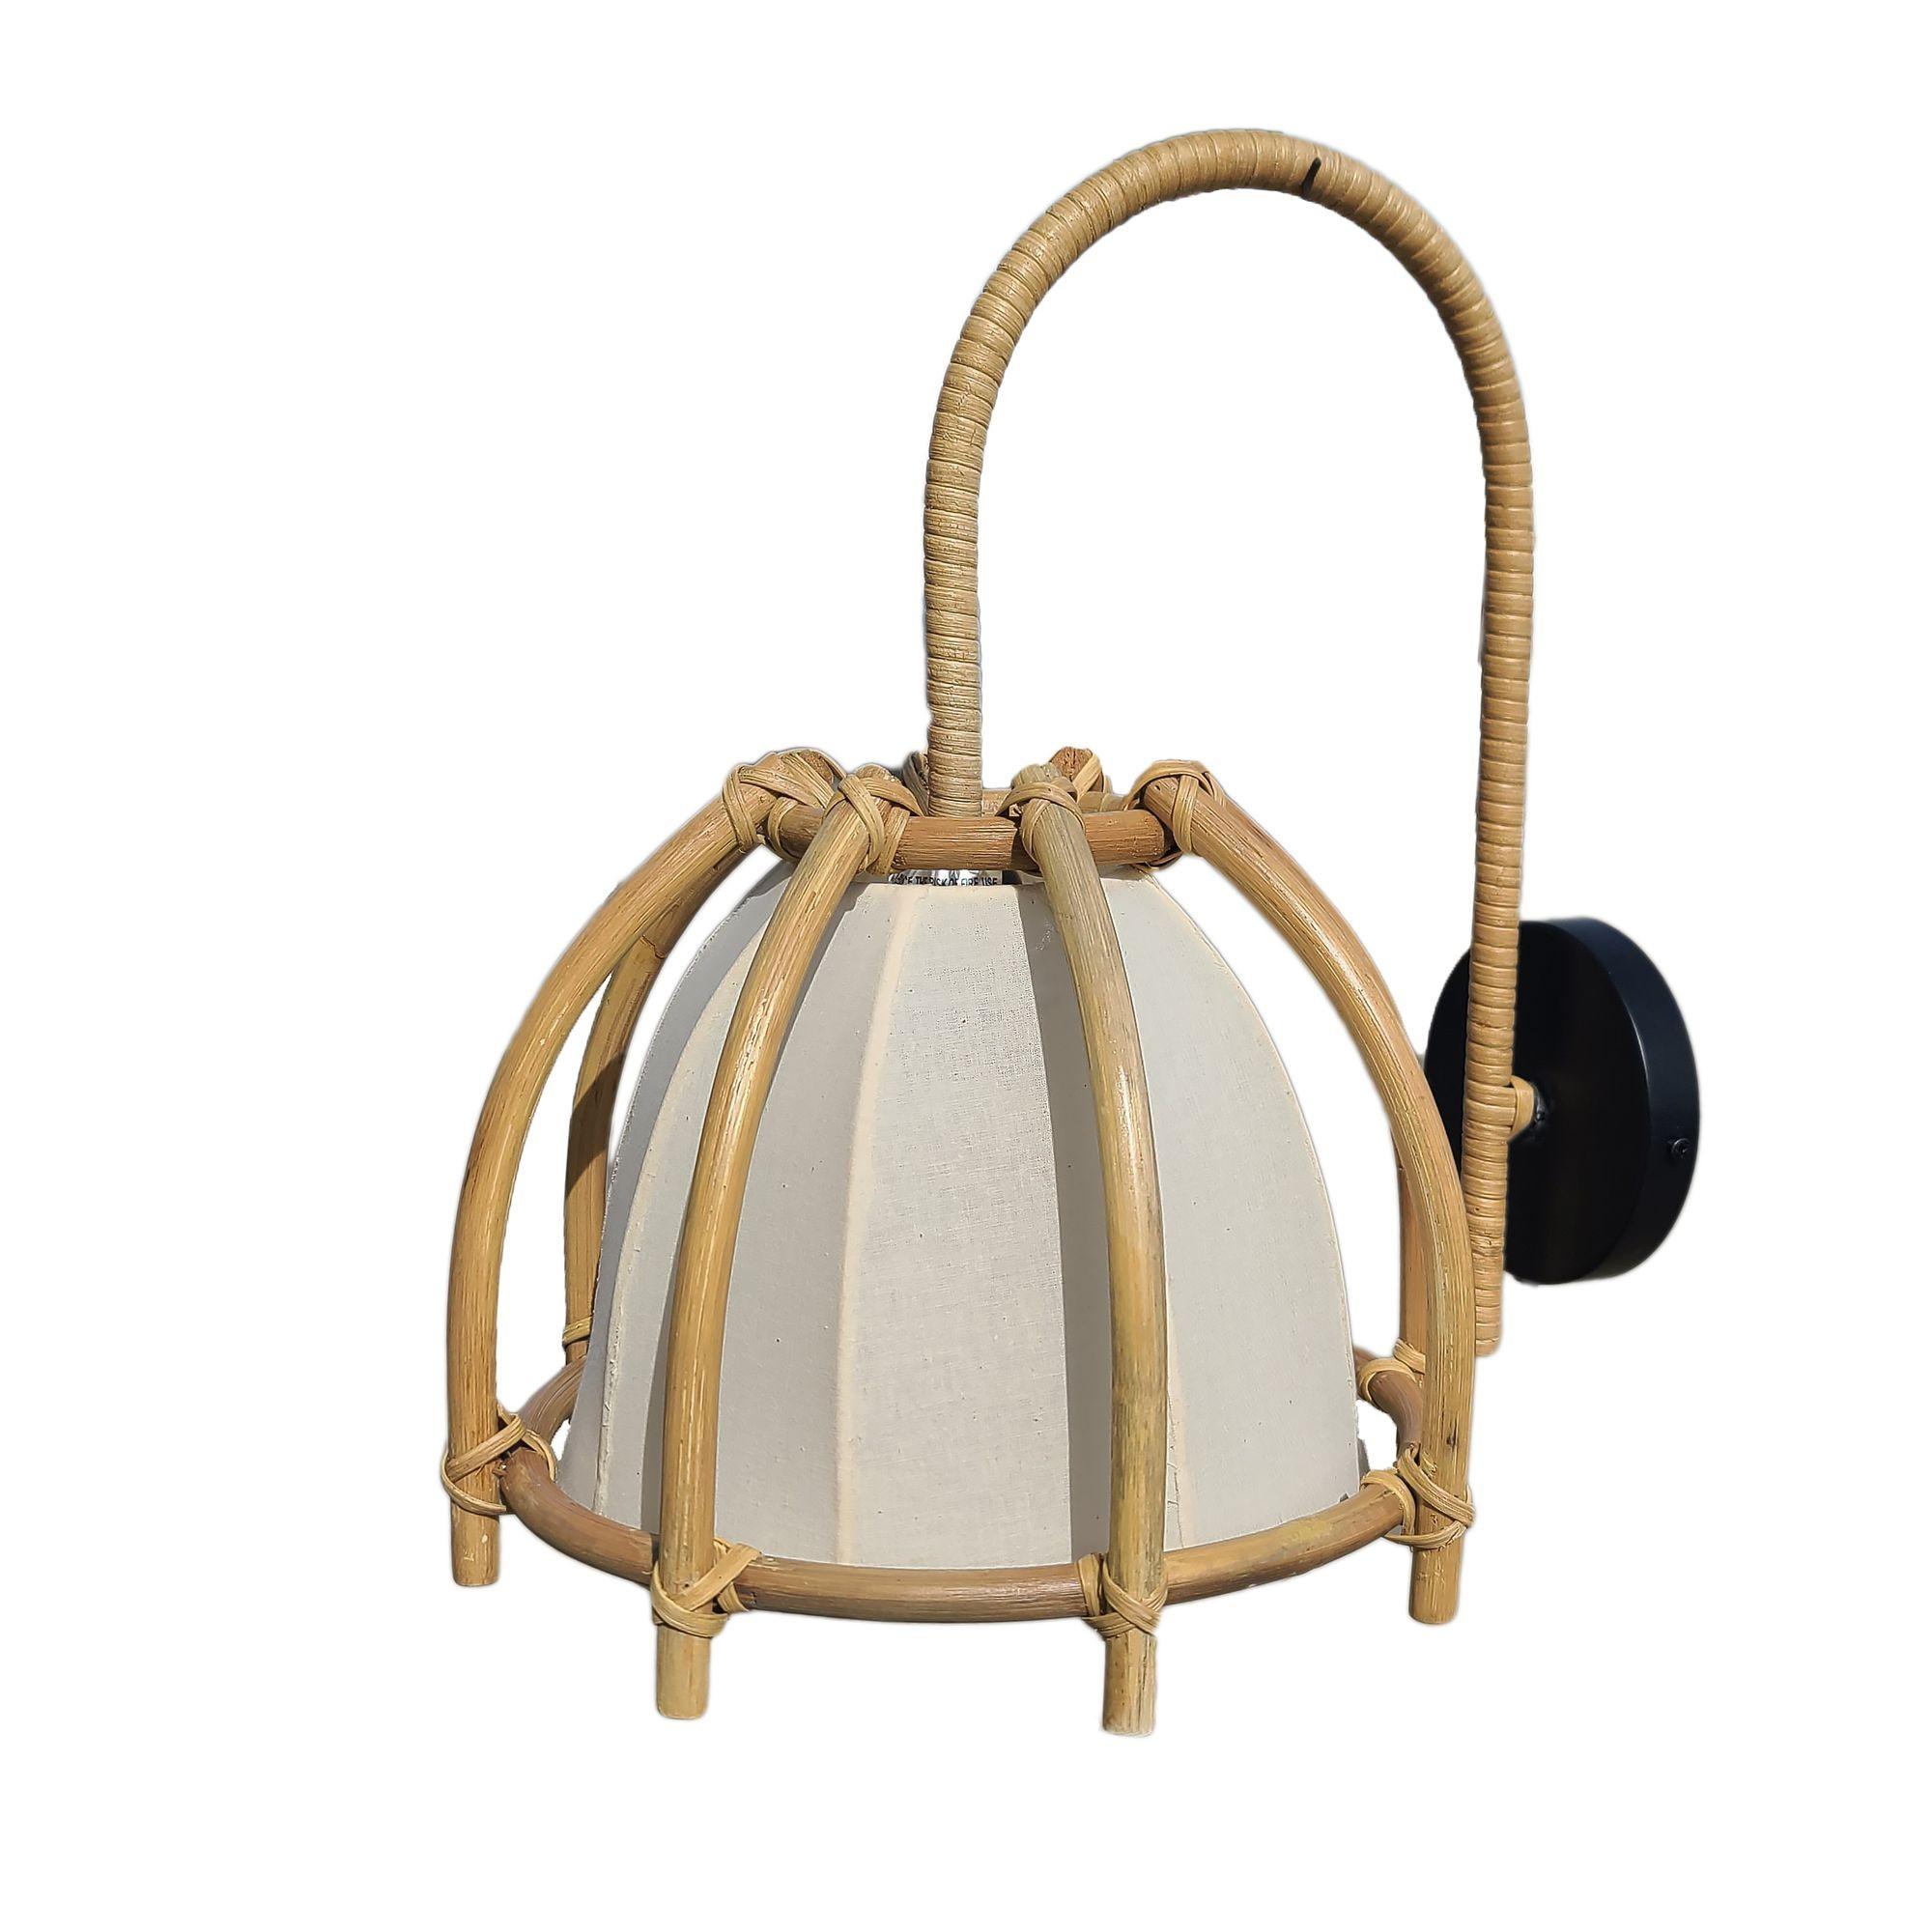 Original Natural finish 1990s rattan wall sconce perfect to add a little warmth to a modern house. The pendant features a stick rattan skeleton shade hung from a slit rattan-wrapped rod connected to a black wall plate.

Sold as a pair
New-Old-Stock,